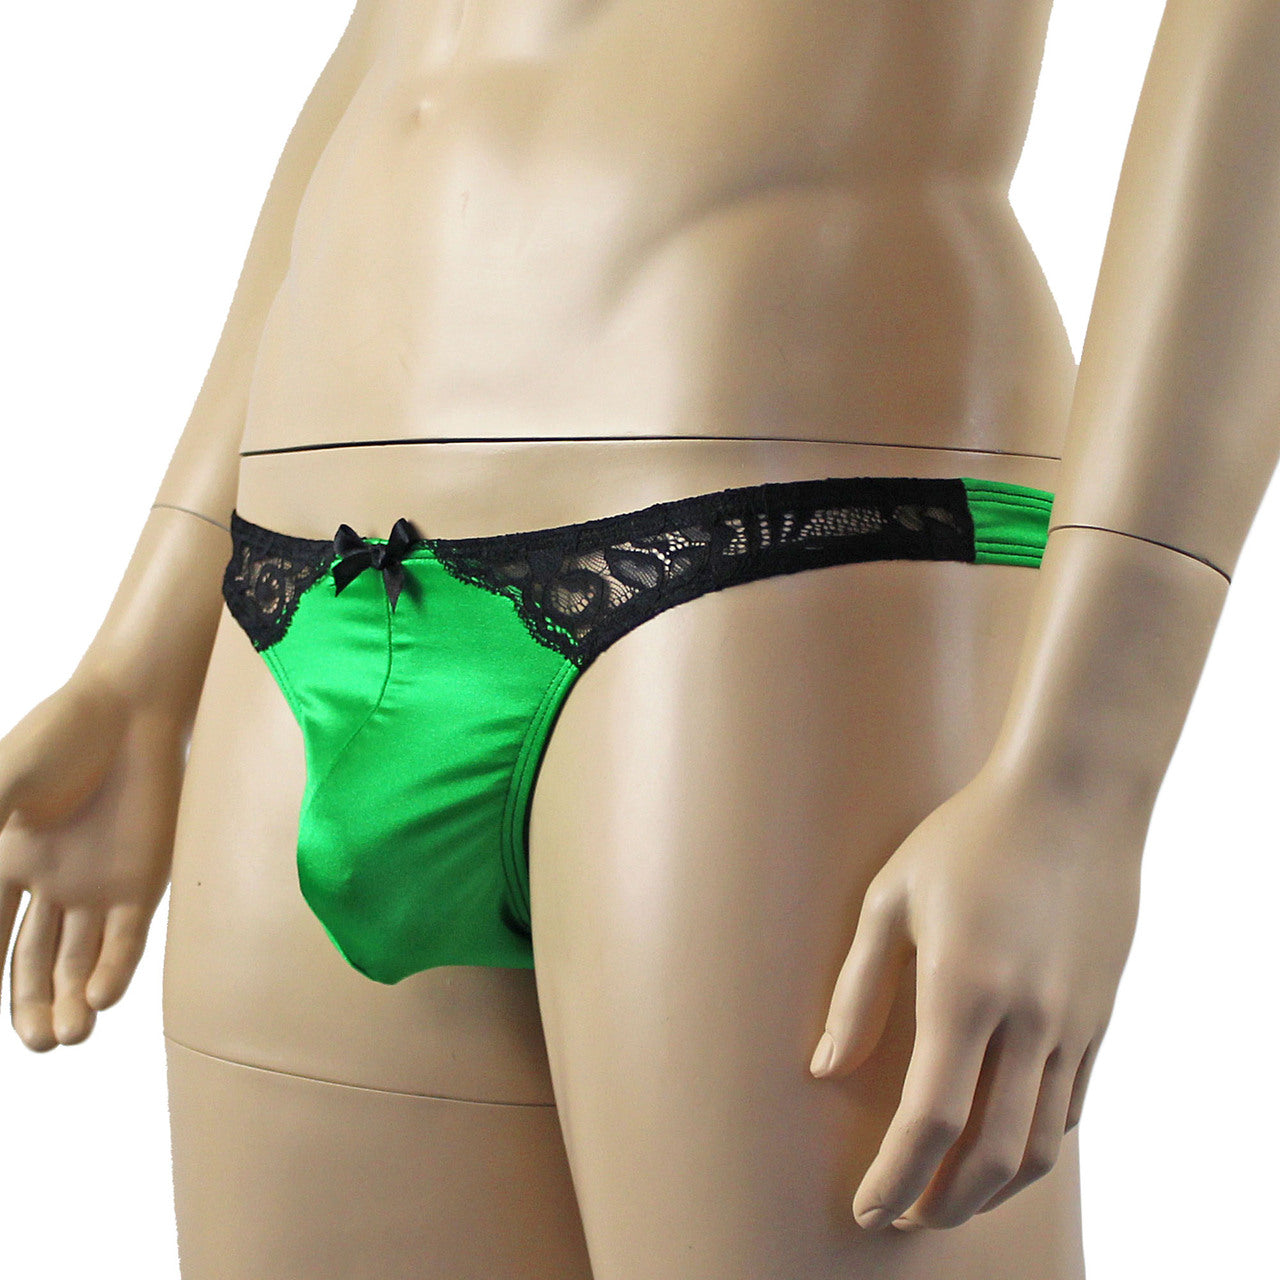 Mens Risque G string Thong Green and Black Lace